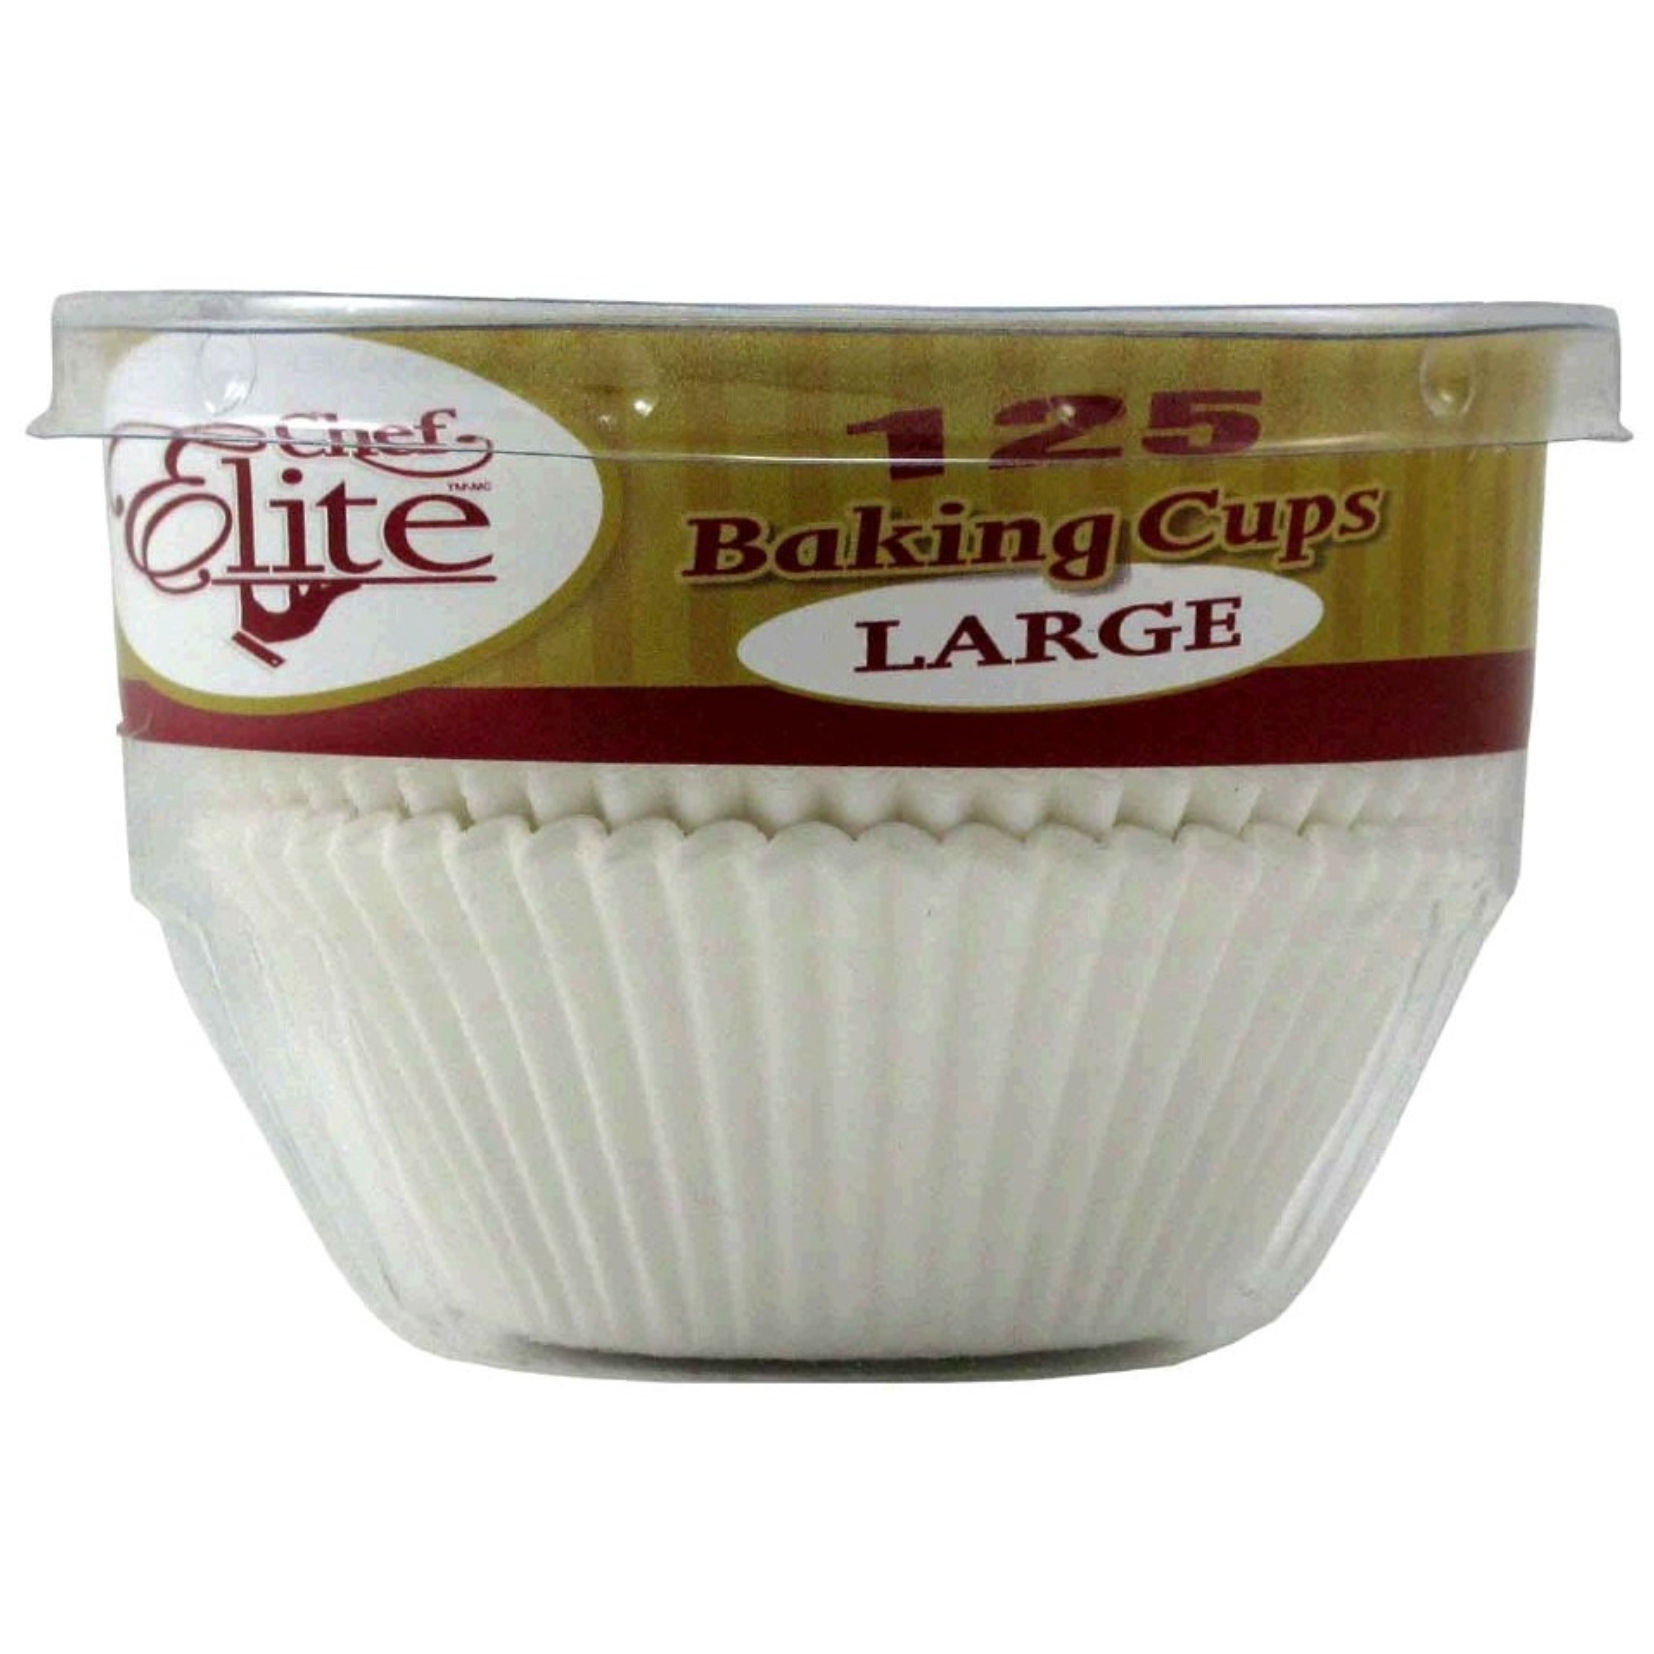 Chef Elite Large Baking Cups 125ct